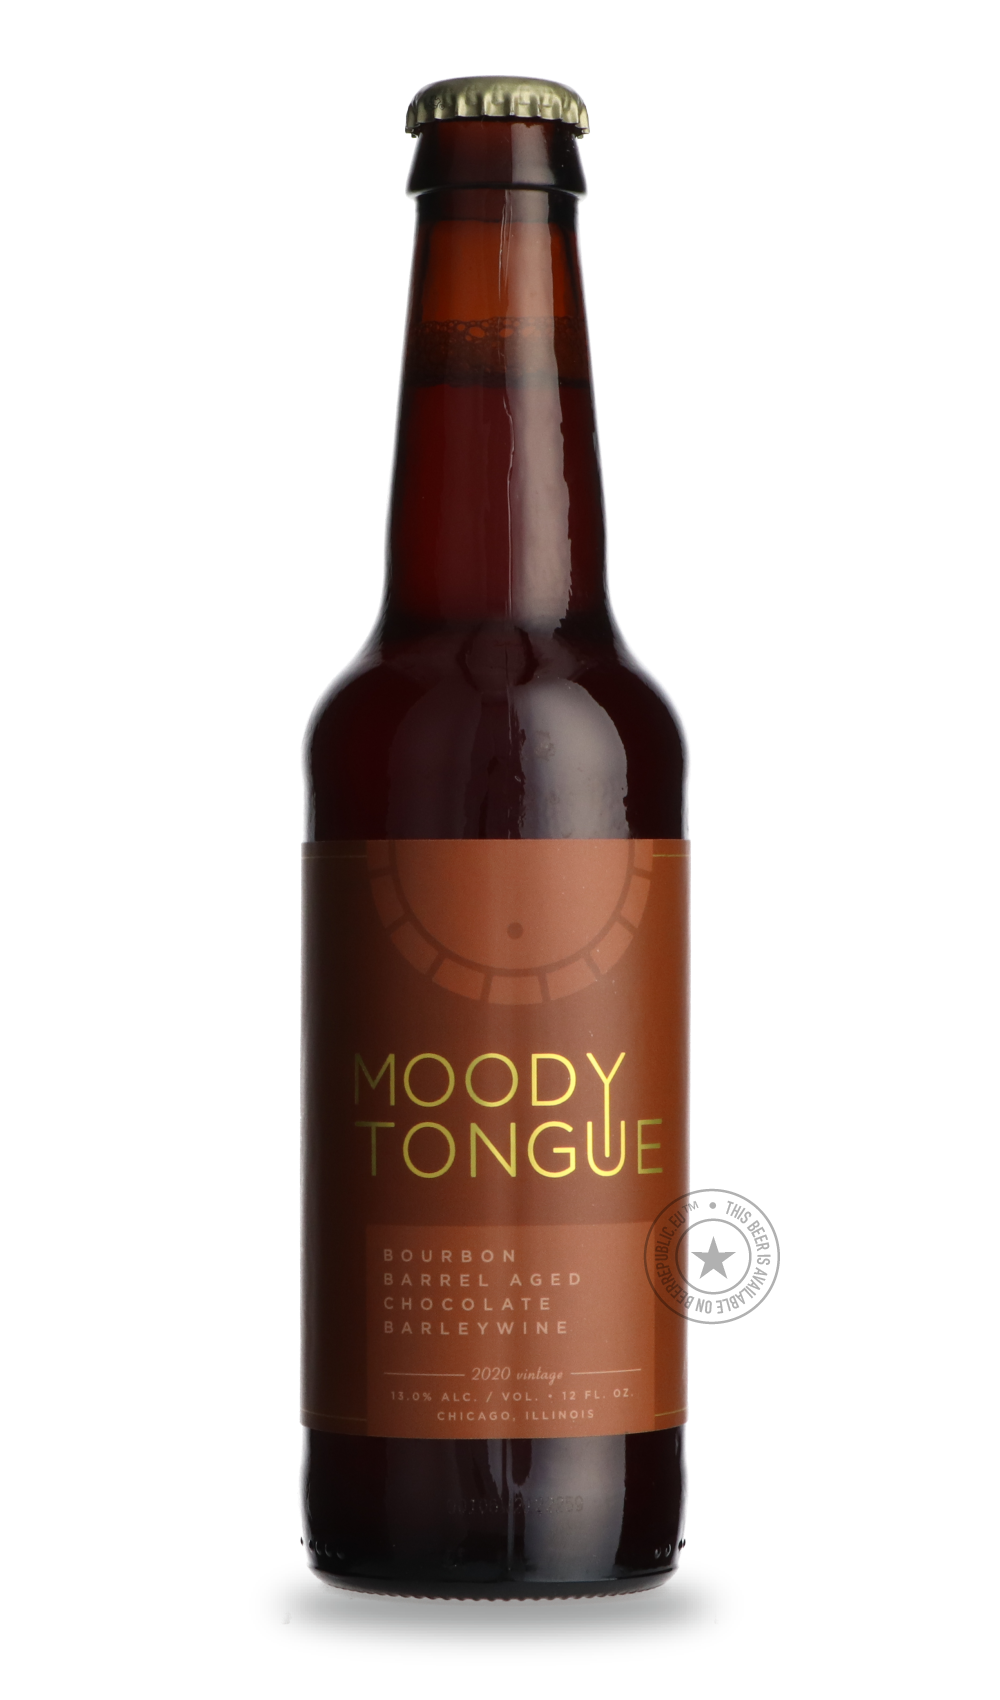 -Moody Tongue- Bourbon Barrel Aged Chocolate Barleywine-Brown & Dark- Only @ Beer Republic - The best online beer store for American & Canadian craft beer - Buy beer online from the USA and Canada - Bier online kopen - Amerikaans bier kopen - Craft beer store - Craft beer kopen - Amerikanisch bier kaufen - Bier online kaufen - Acheter biere online - IPA - Stout - Porter - New England IPA - Hazy IPA - Imperial Stout - Barrel Aged - Barrel Aged Imperial Stout - Brown - Dark beer - Blond - Blonde - Pilsner - L